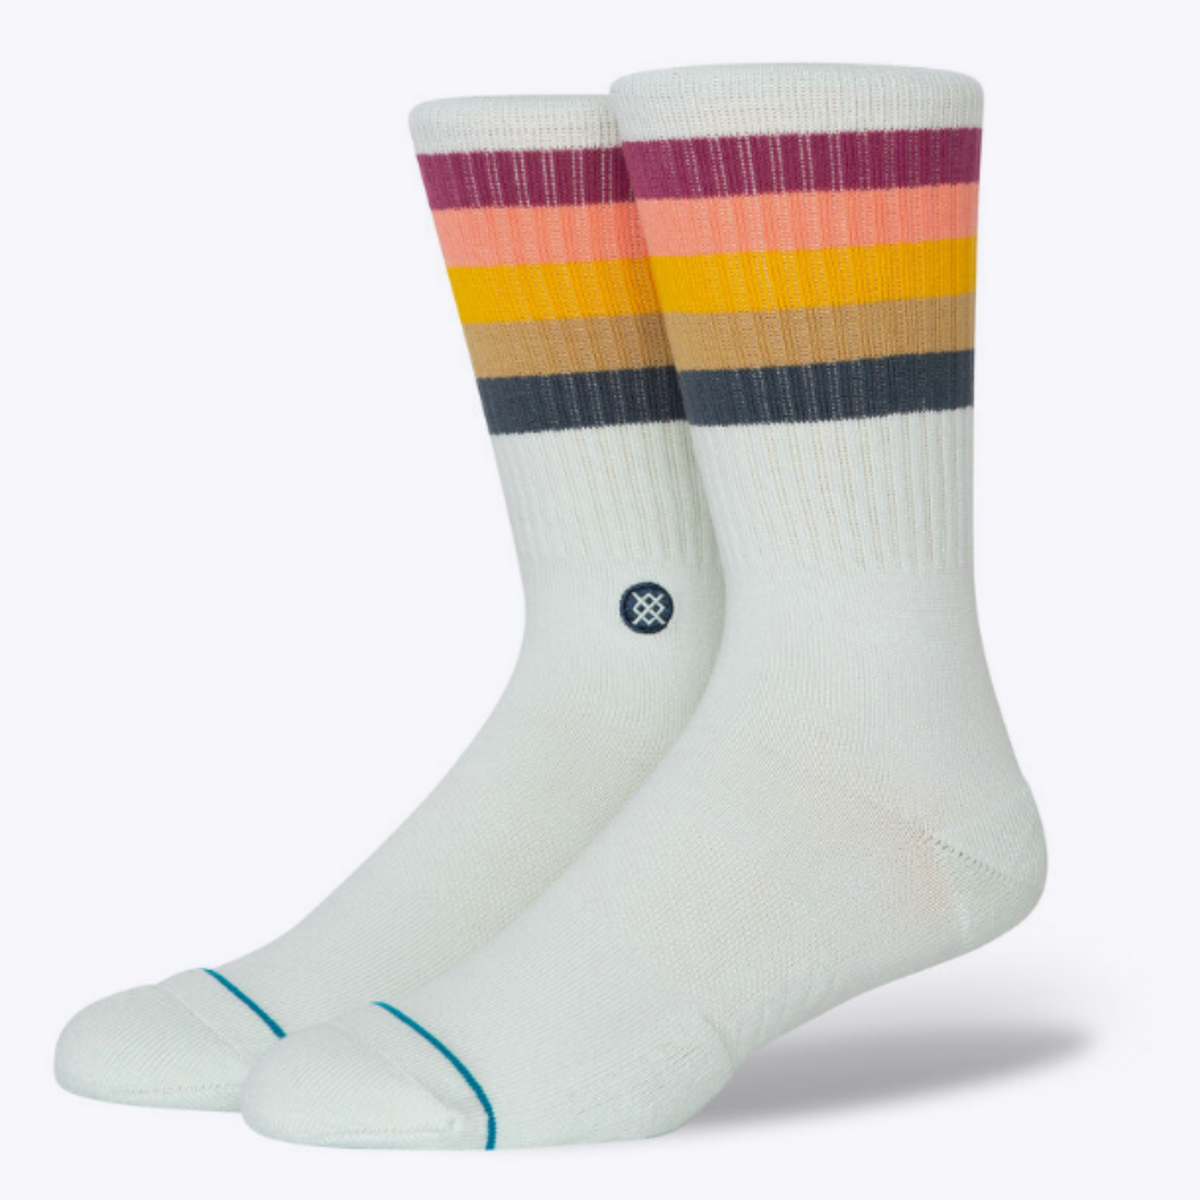 Stance Maliboo women&#39;s crew sock featuring light blue sock with cranberry, peach, tumeric, beige, and gray stripes at cuff. Socks shown on display feet. 